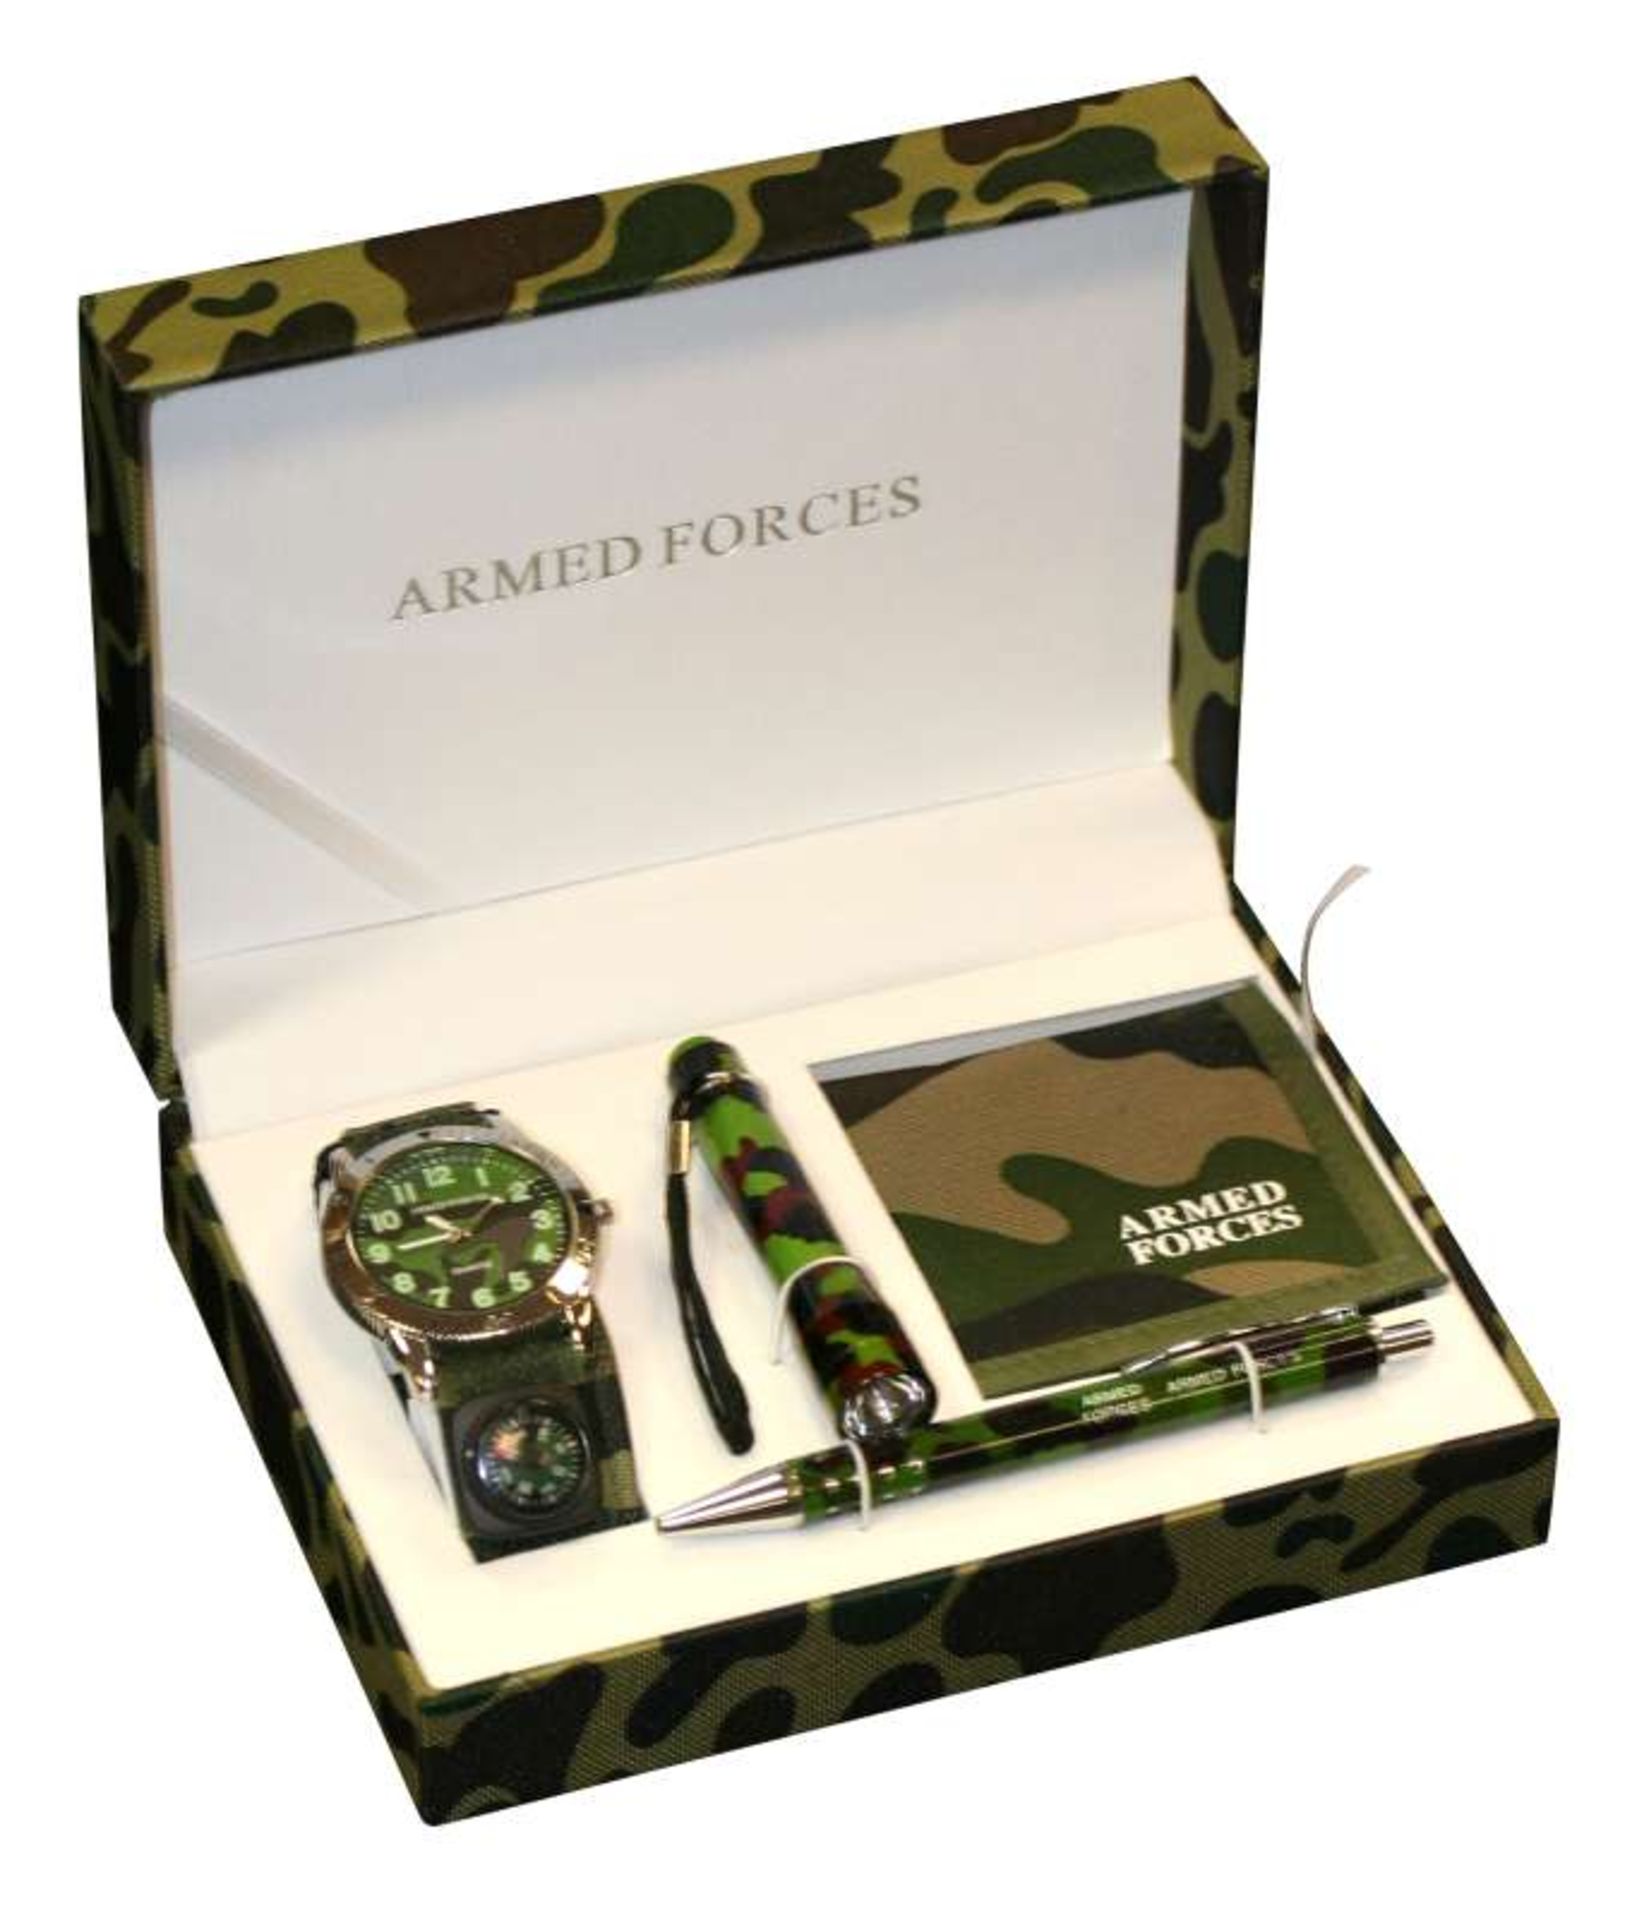 V Brand New Gents Armed Forces Watch Flashlight Pen & Wallet Gift Set X 2 YOUR BID PRICE TO BE